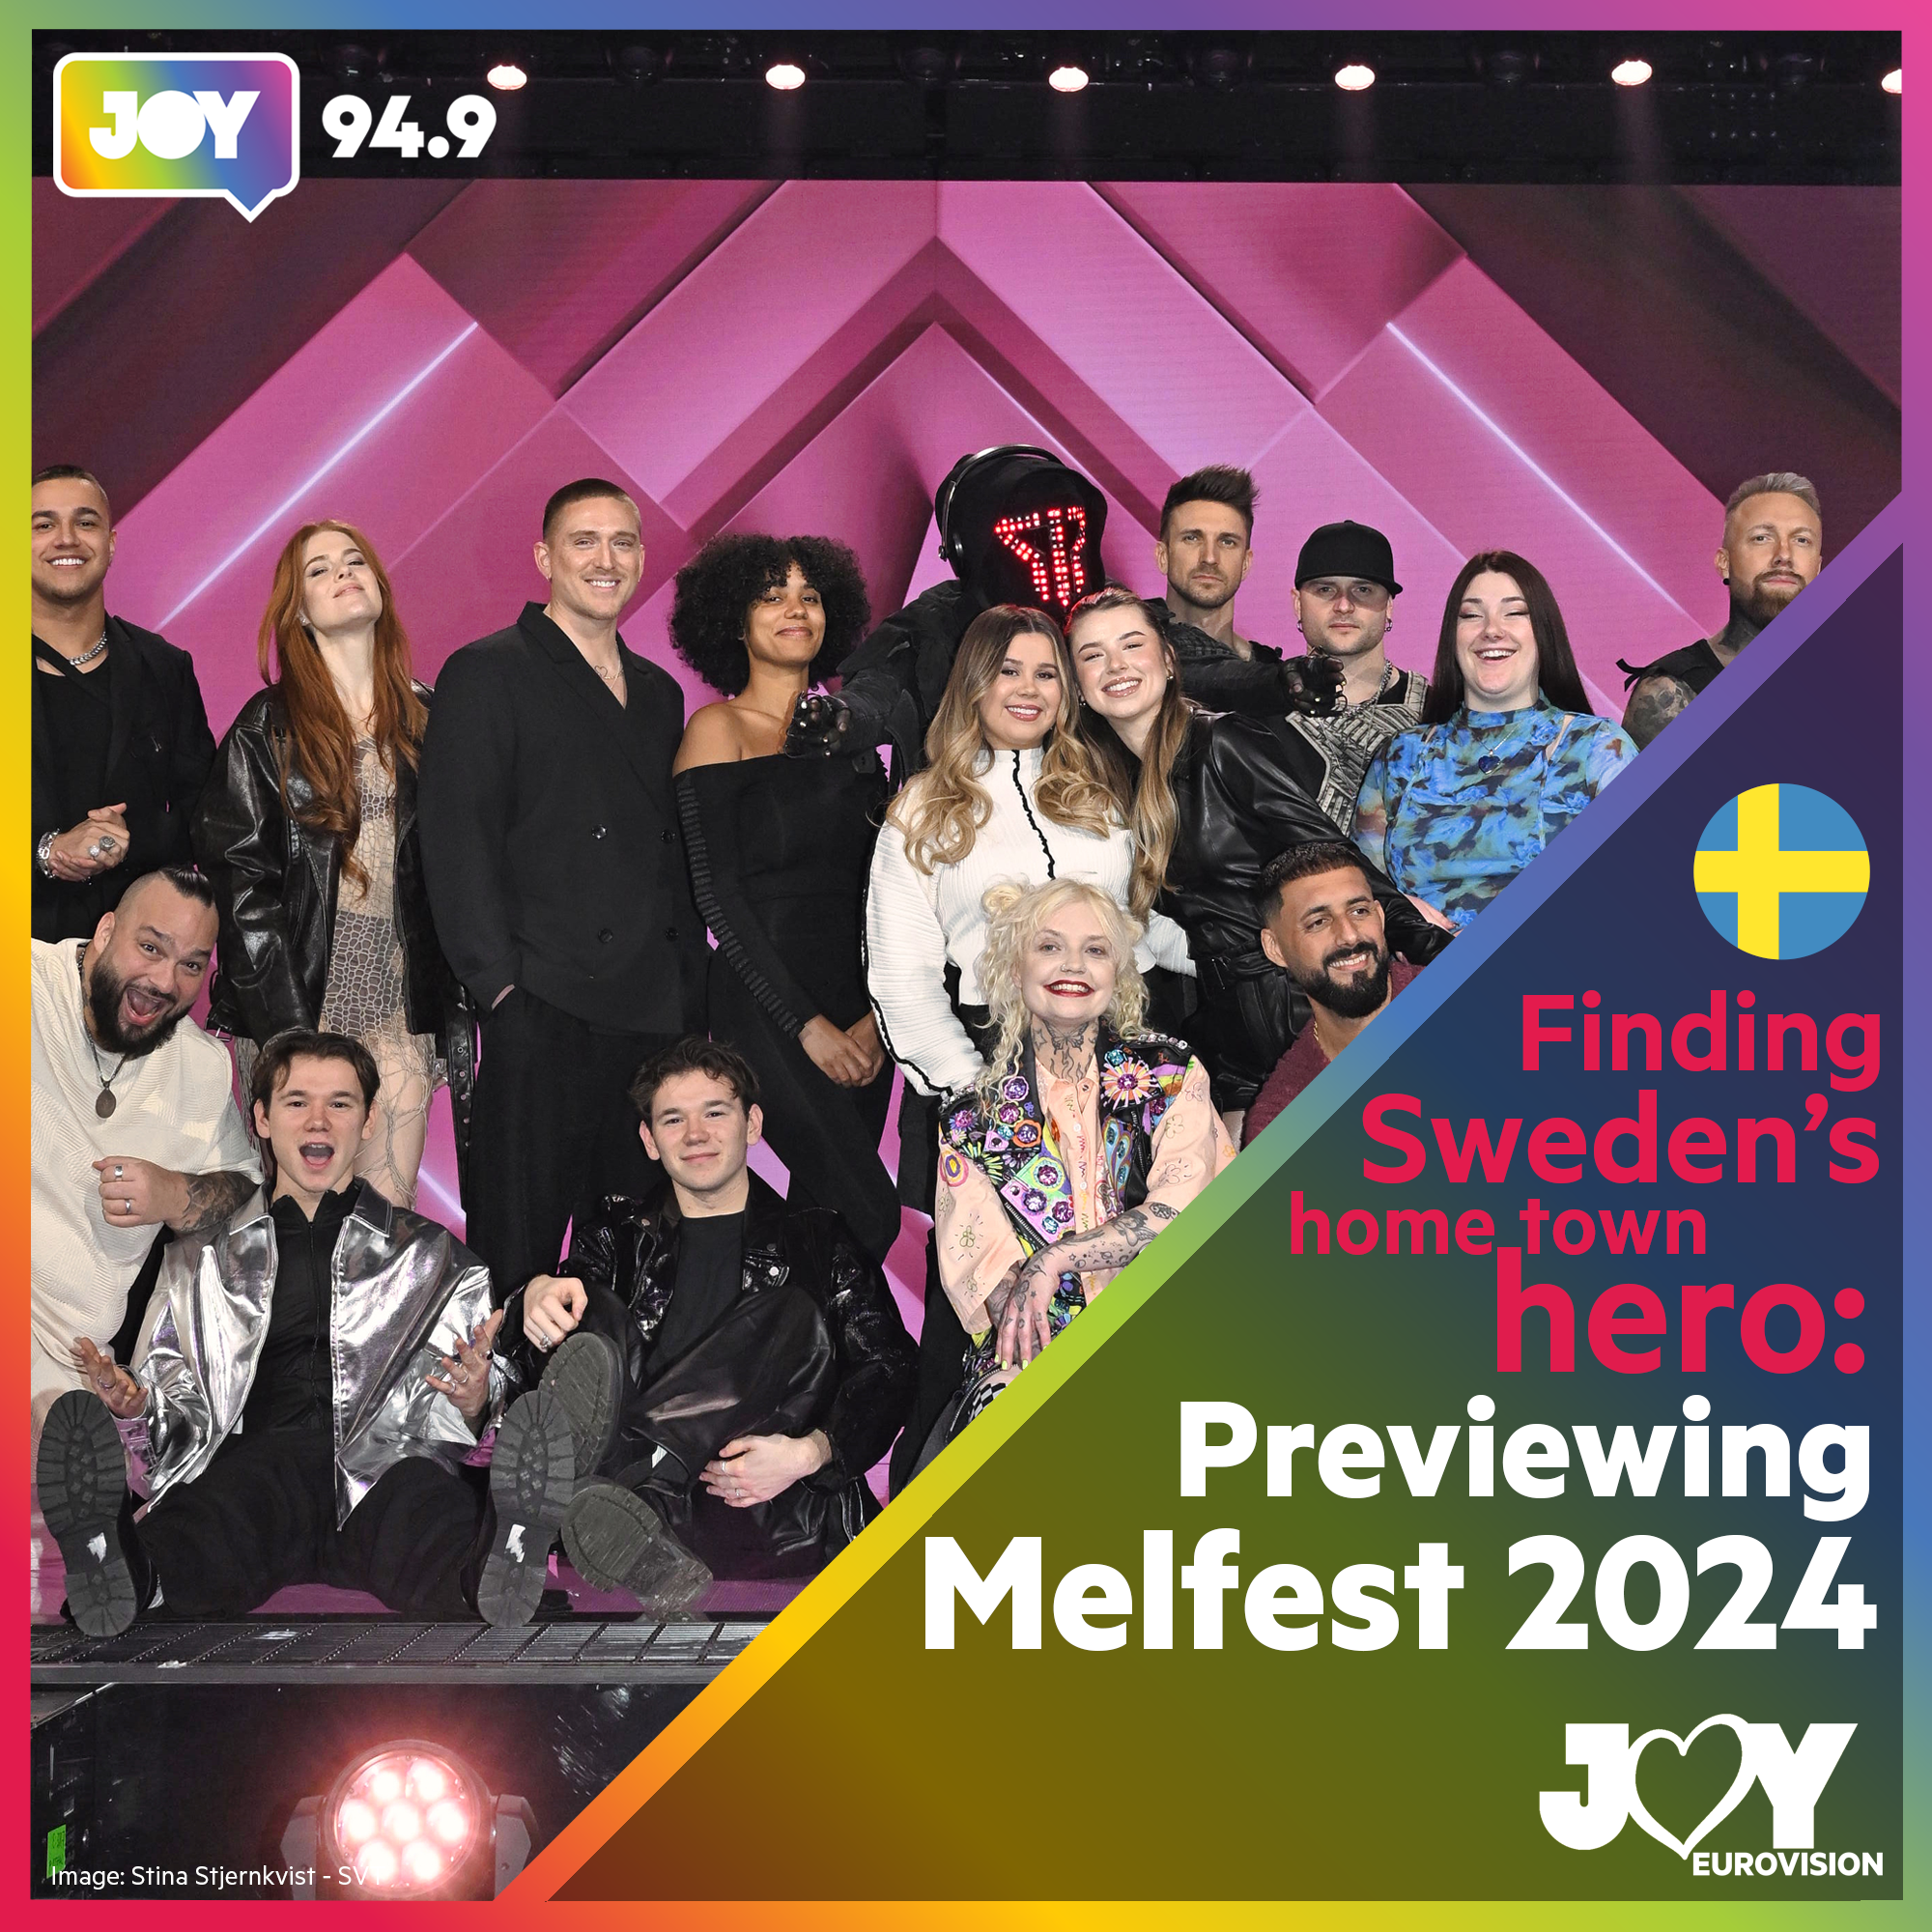 🇸🇪 Finding Sweden’s home town hero: Previewing Melodifestivalen 2024